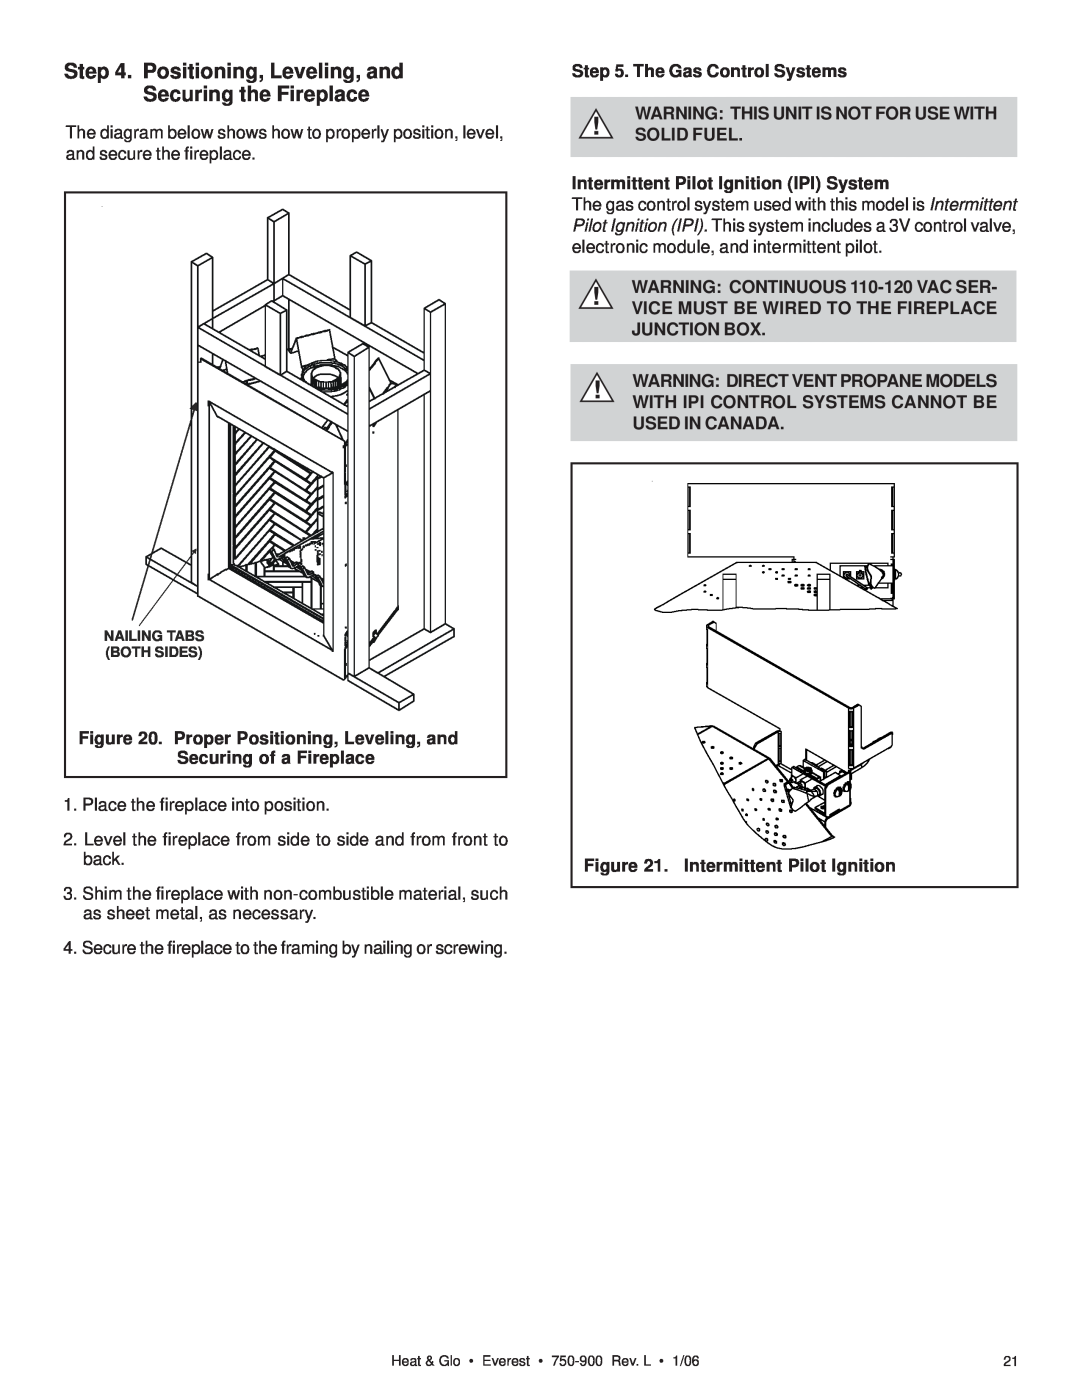 Heat & Glo LifeStyle EVEREST manual Proper Positioning, Leveling, and, Securing of a Fireplace, The Gas Control Systems 